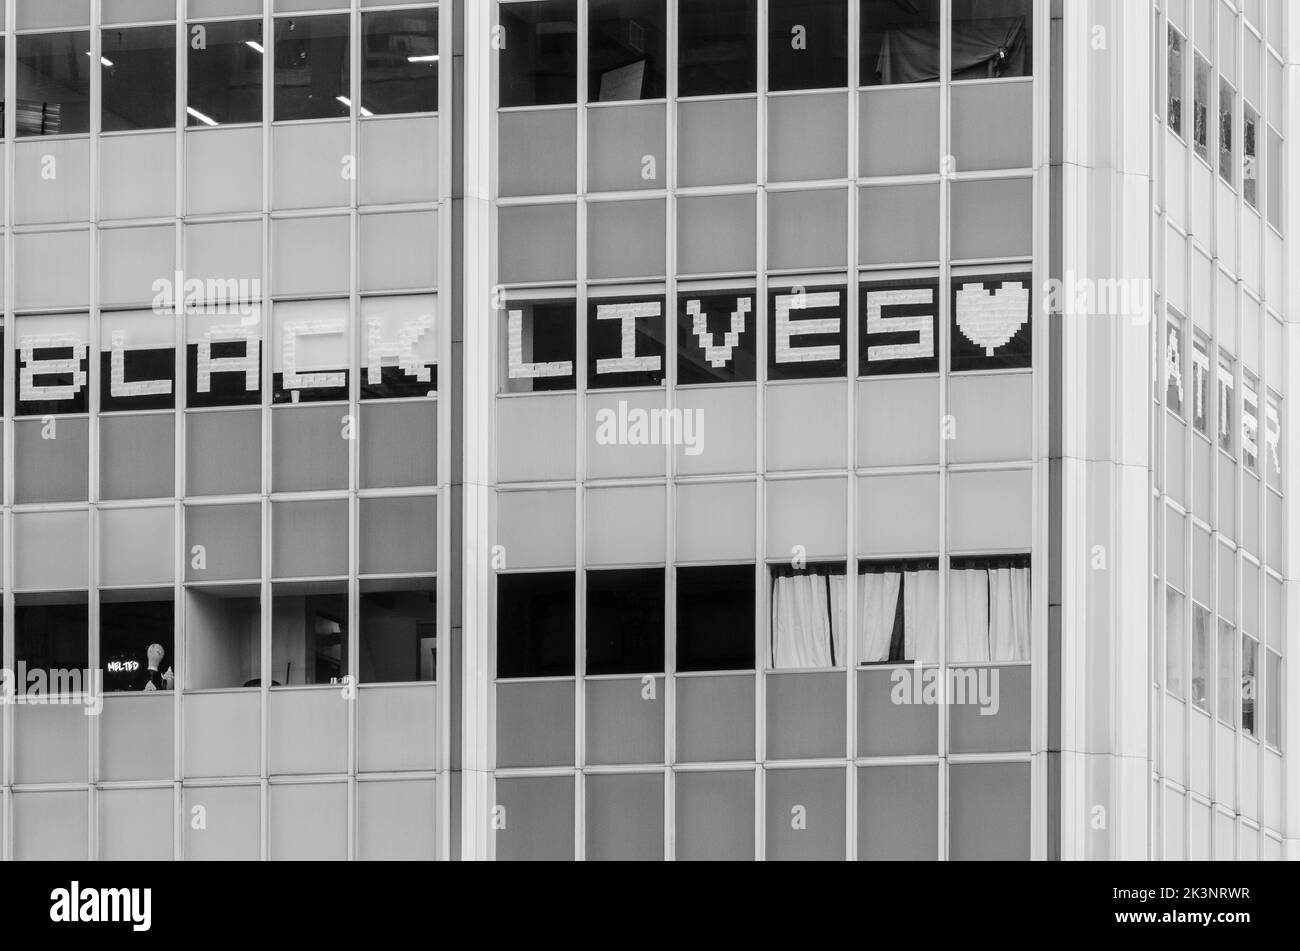 Black Lives Matter lettering in an office building in Dallas, Texas Stock Photo